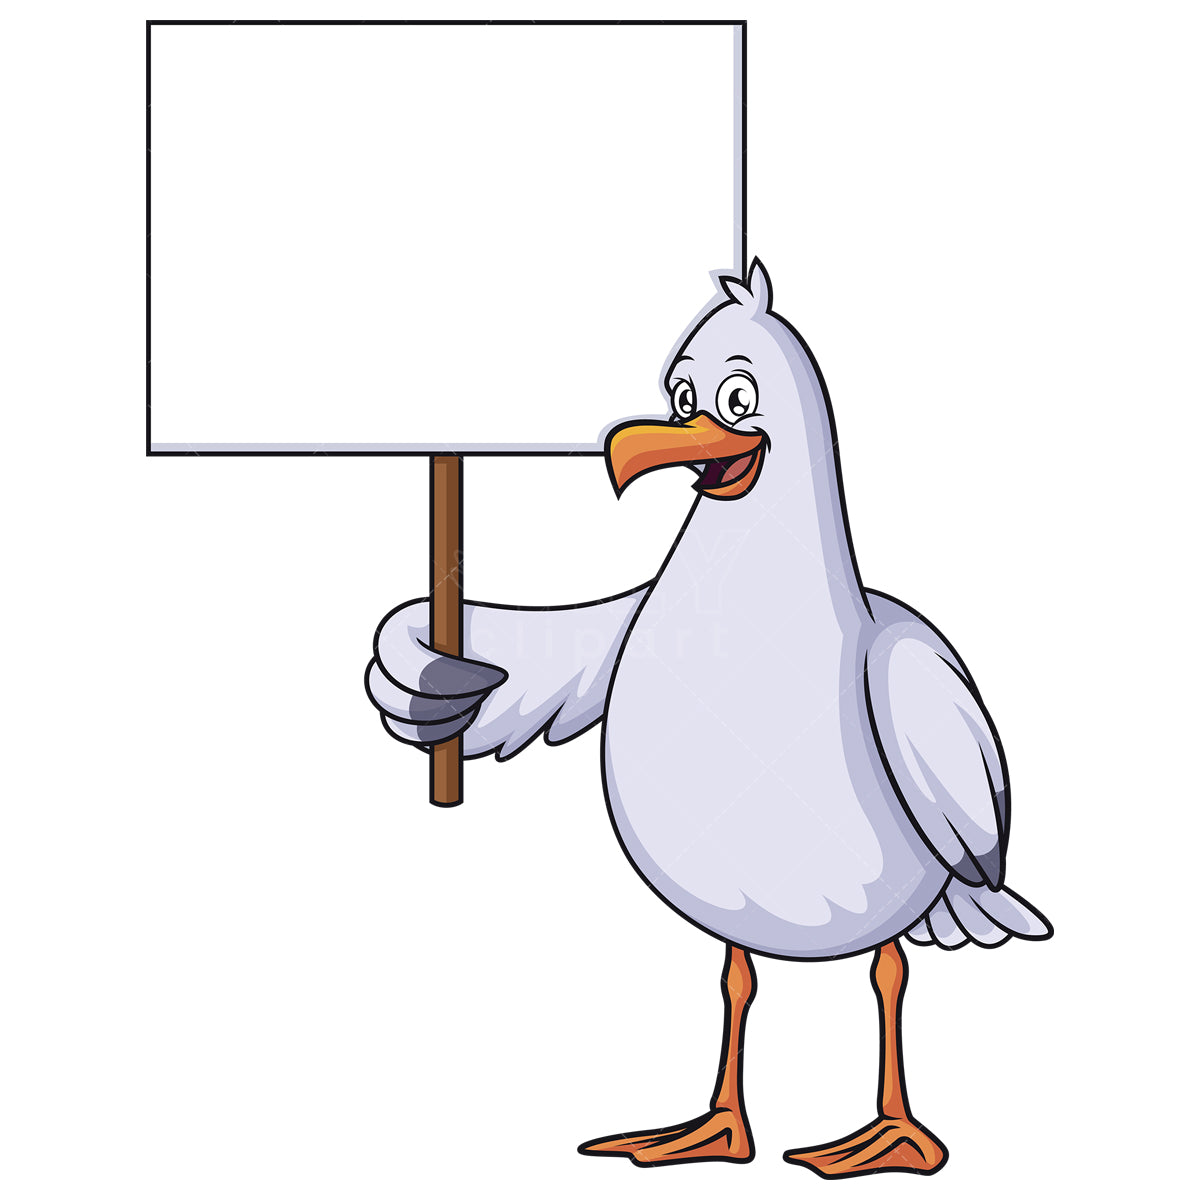 Royalty-free stock vector illustration of a seagull holding blank sign.